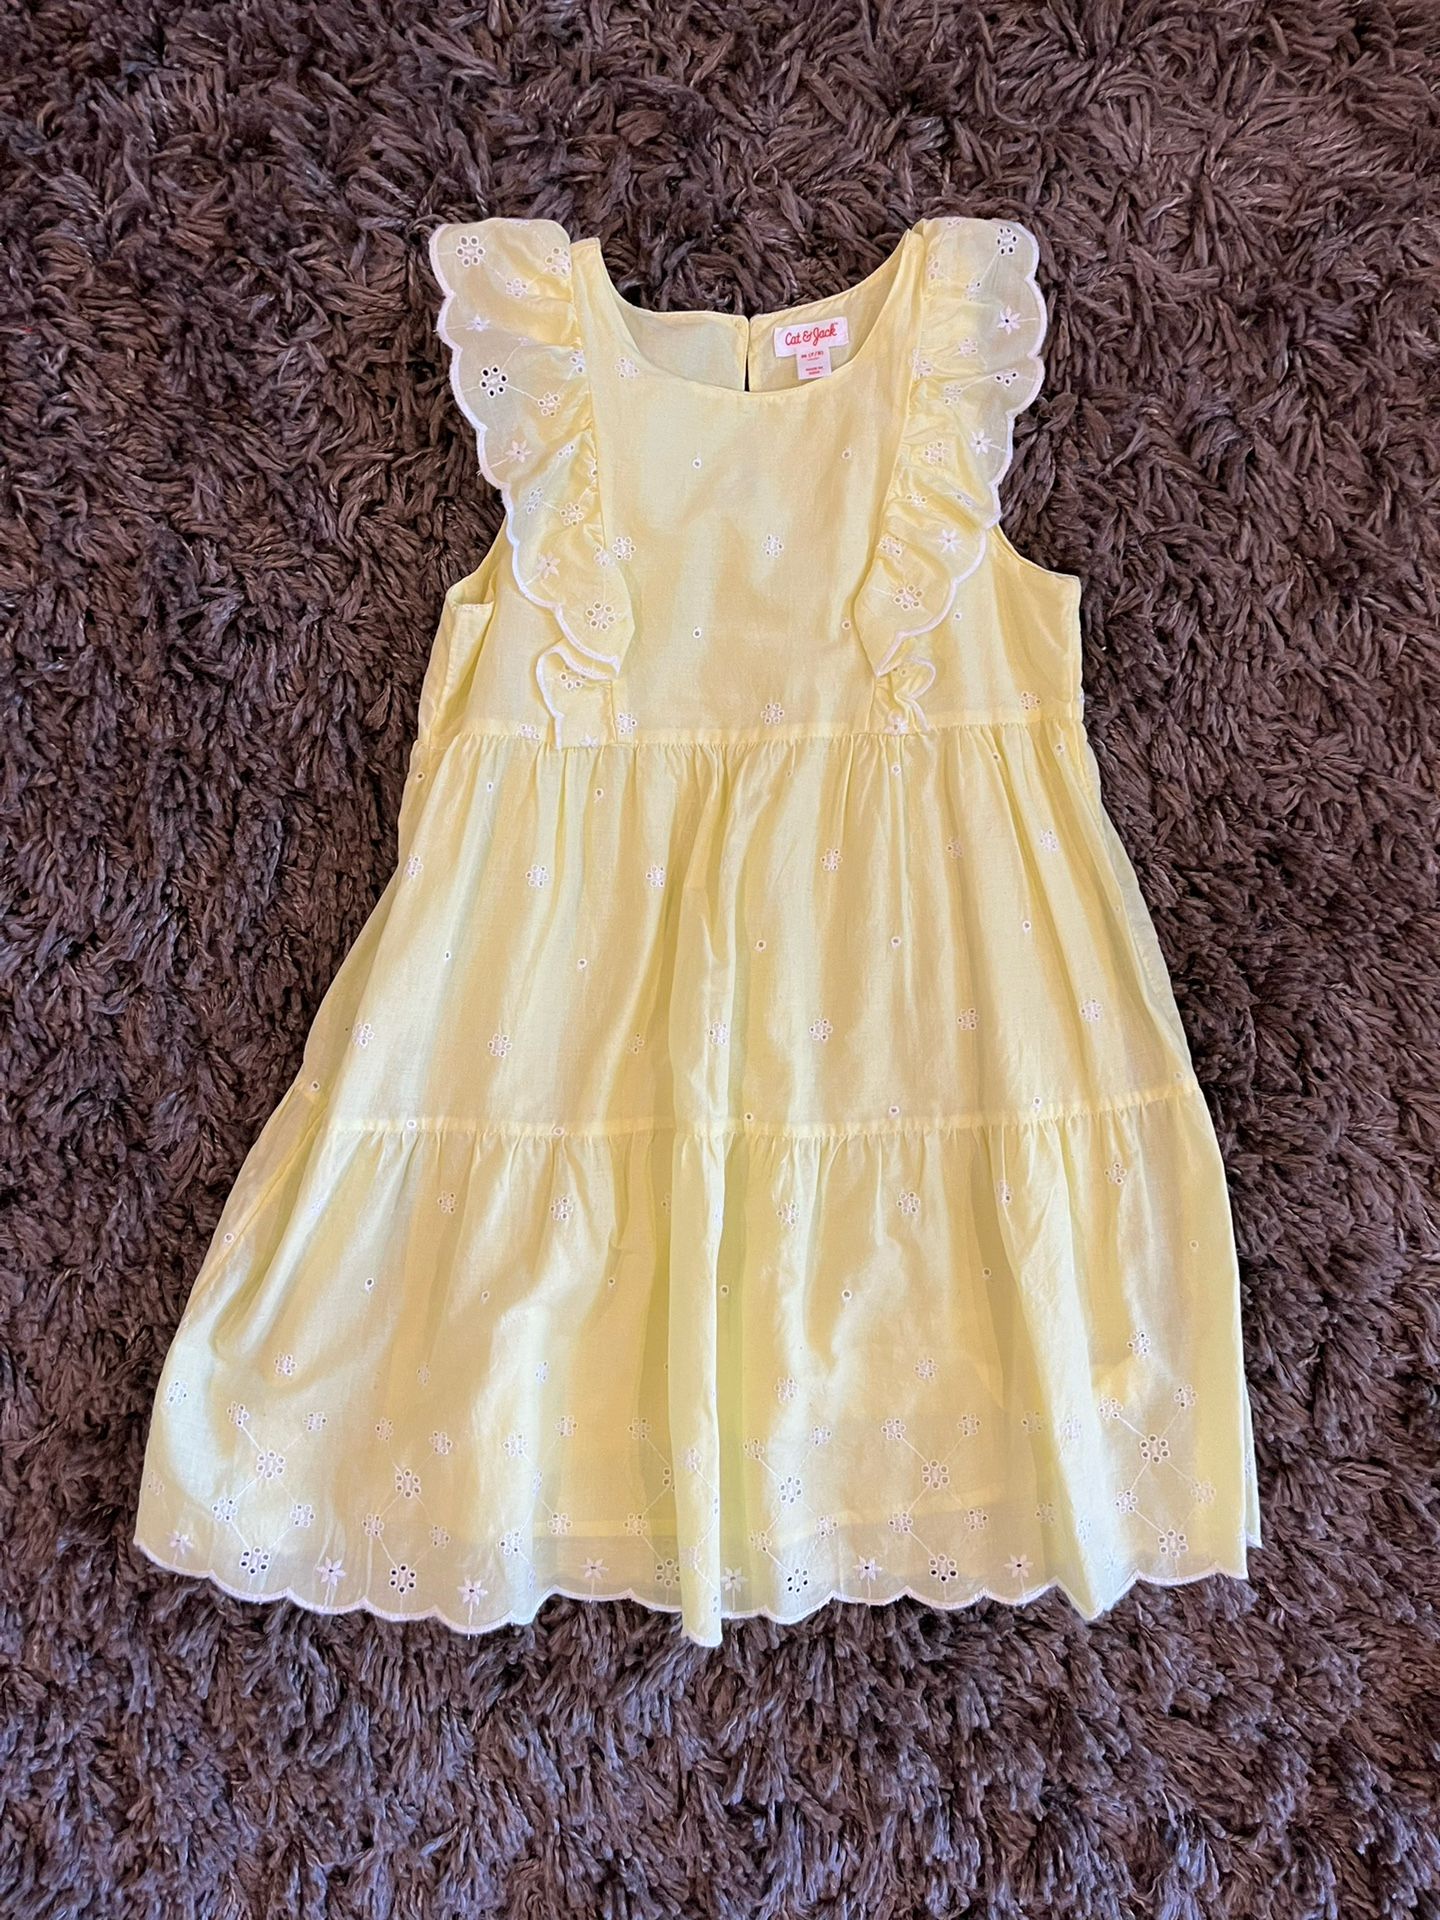 Cat and Jack Yellow Dress